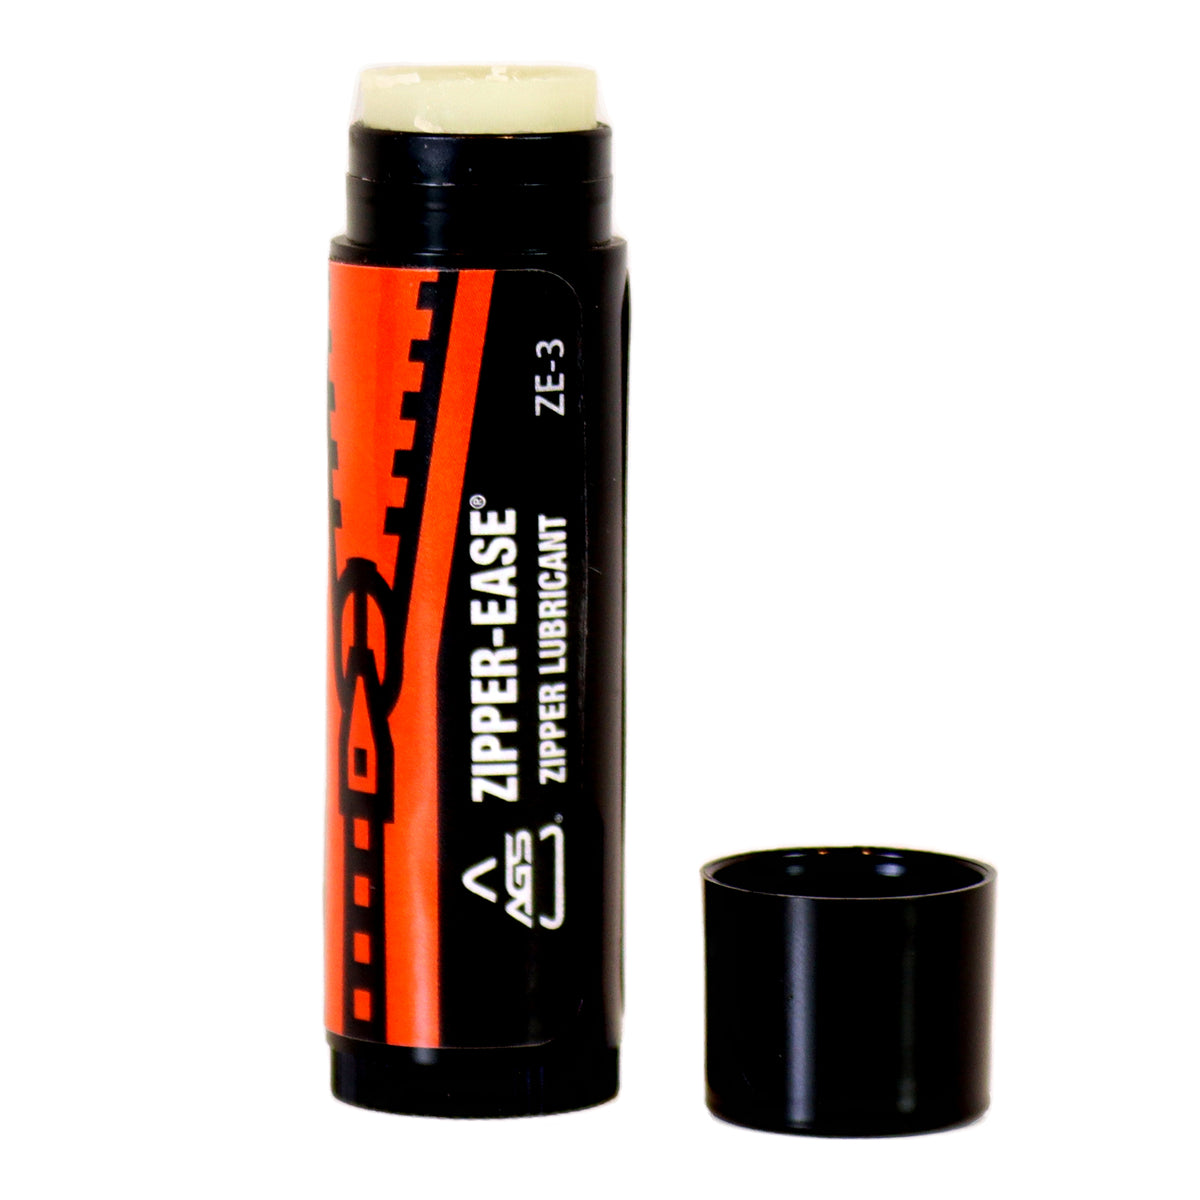 2pcs of Zipper Ease 227 Lubricant Made in USA 